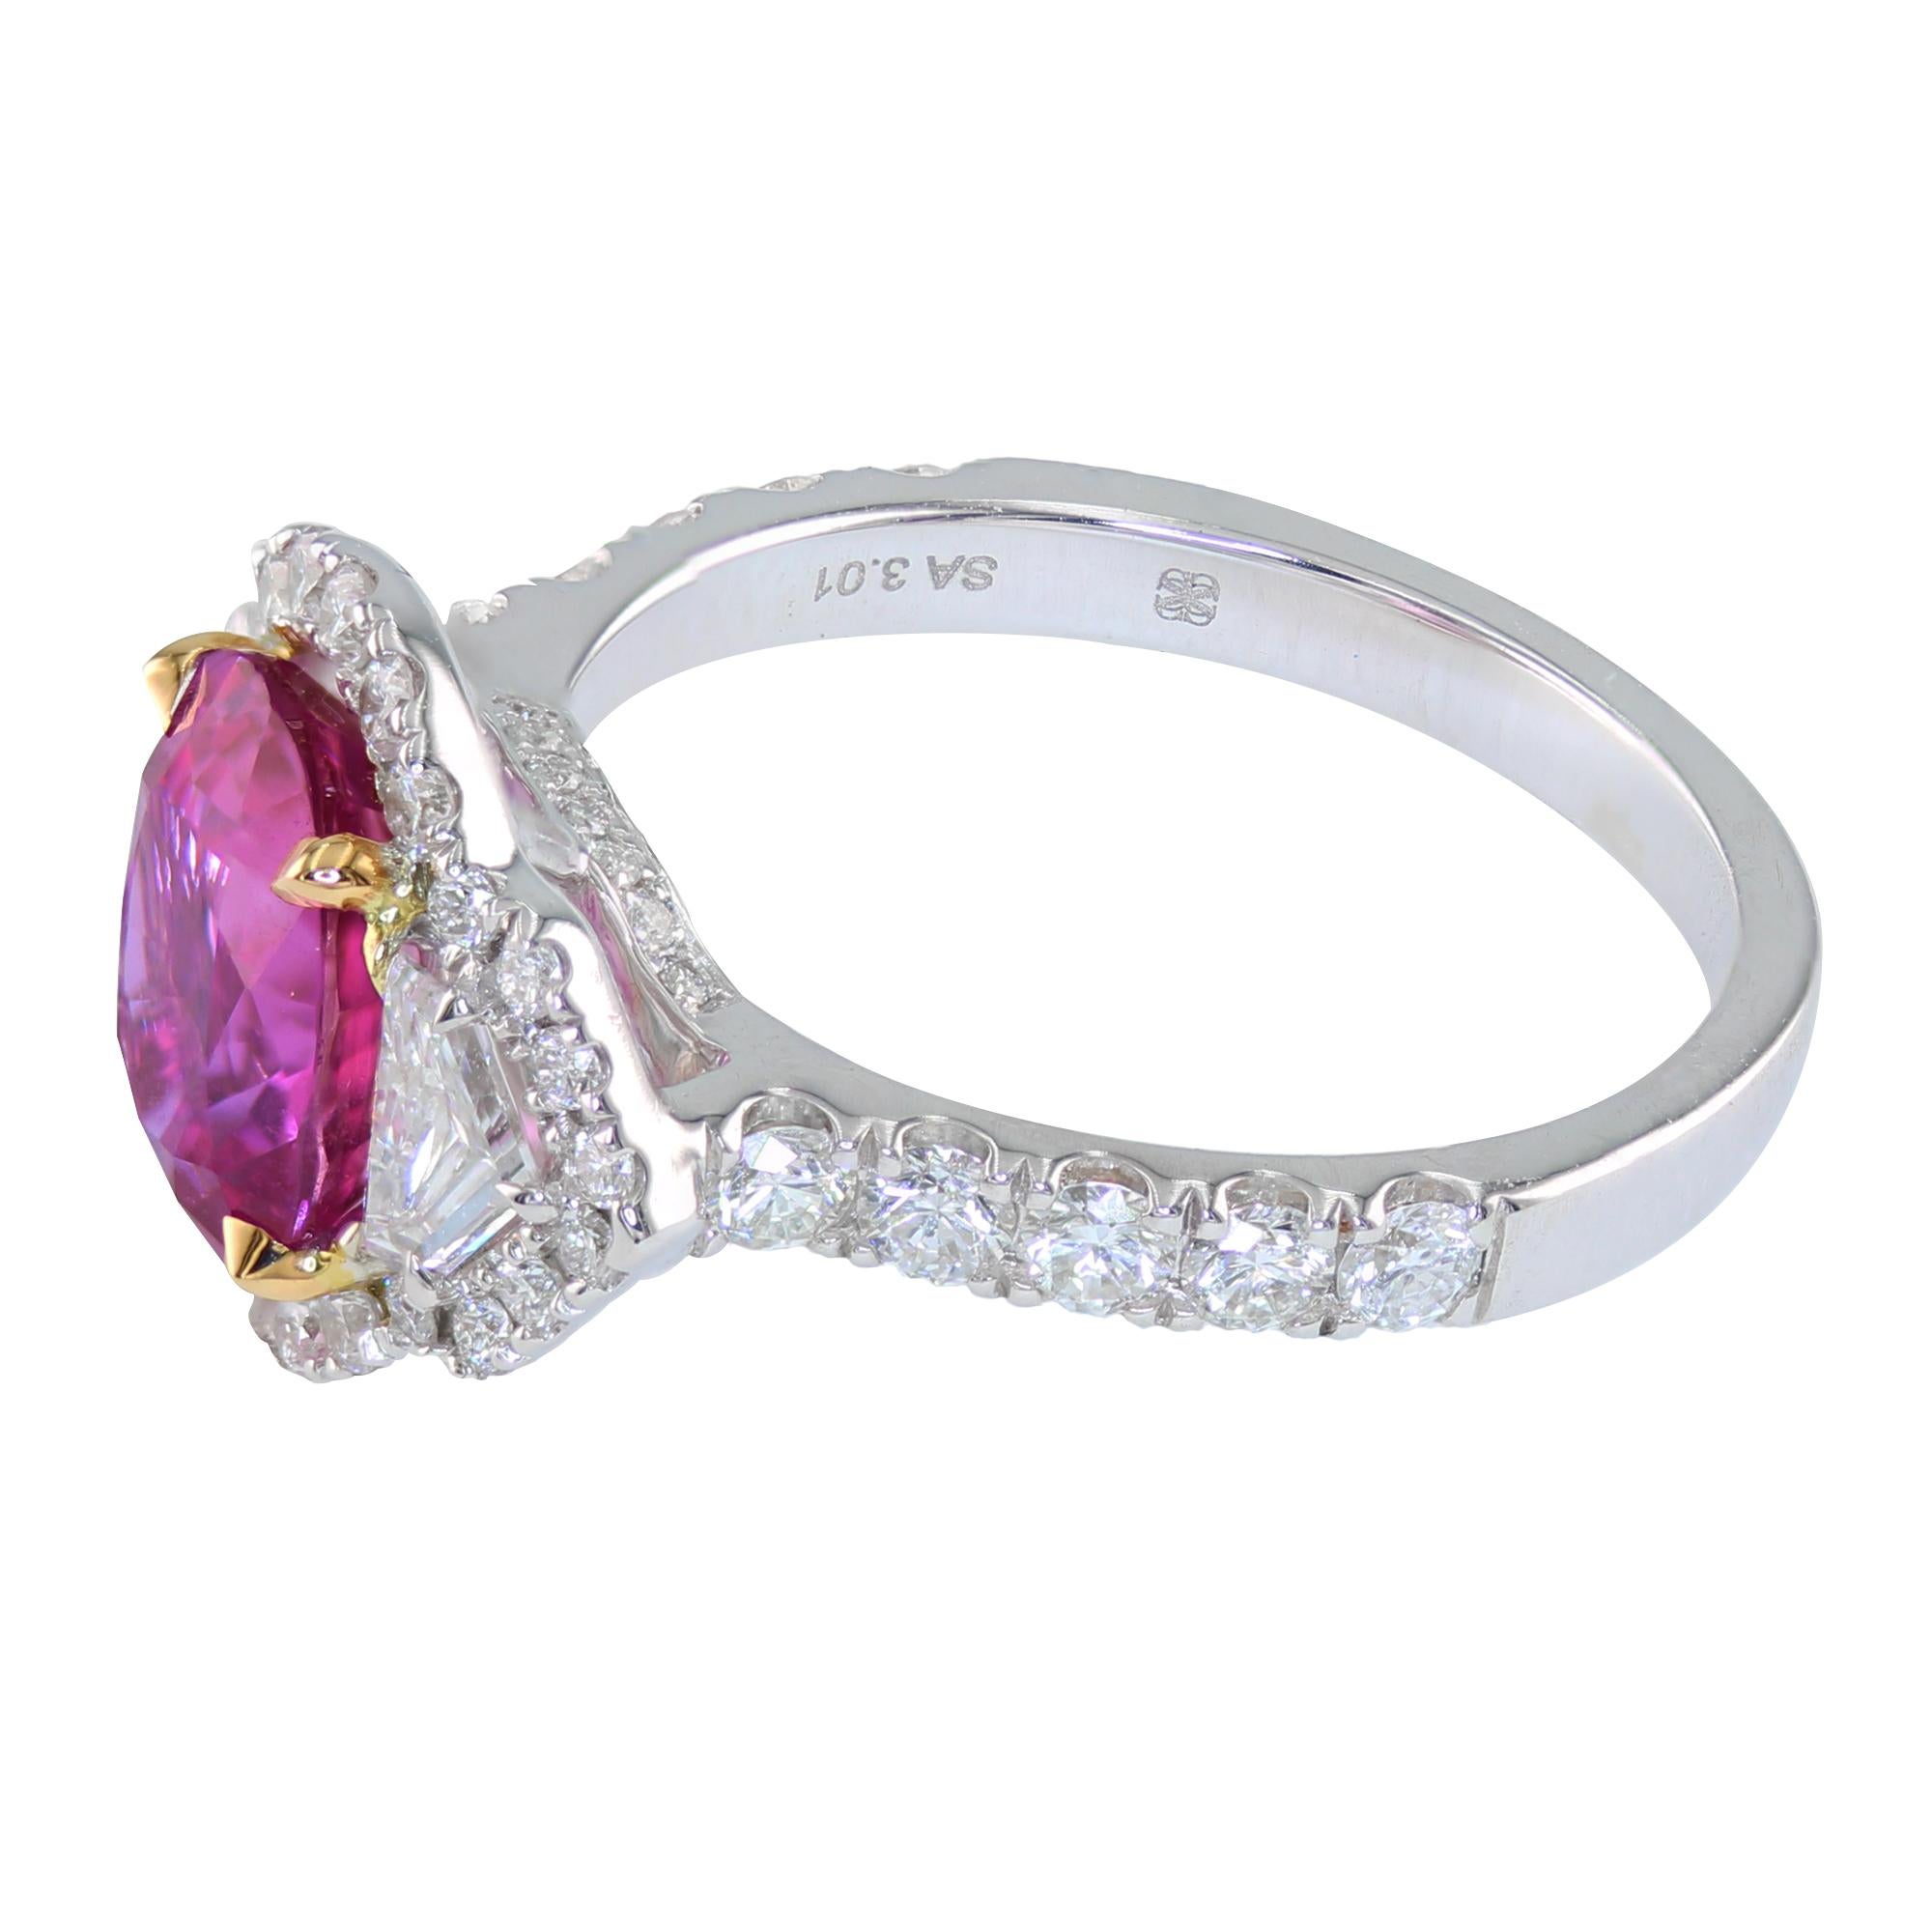 3.01 carat Oval Pink Sapphire, complimented by 0.34 carat epaulet diamonds, surrounded by 0.74 carat round diamonds. 

Pretty in pink classy three-stone-ring, for the perfect one-of-a-kind colored gemstone engagement.
May also be worn as a beautiful